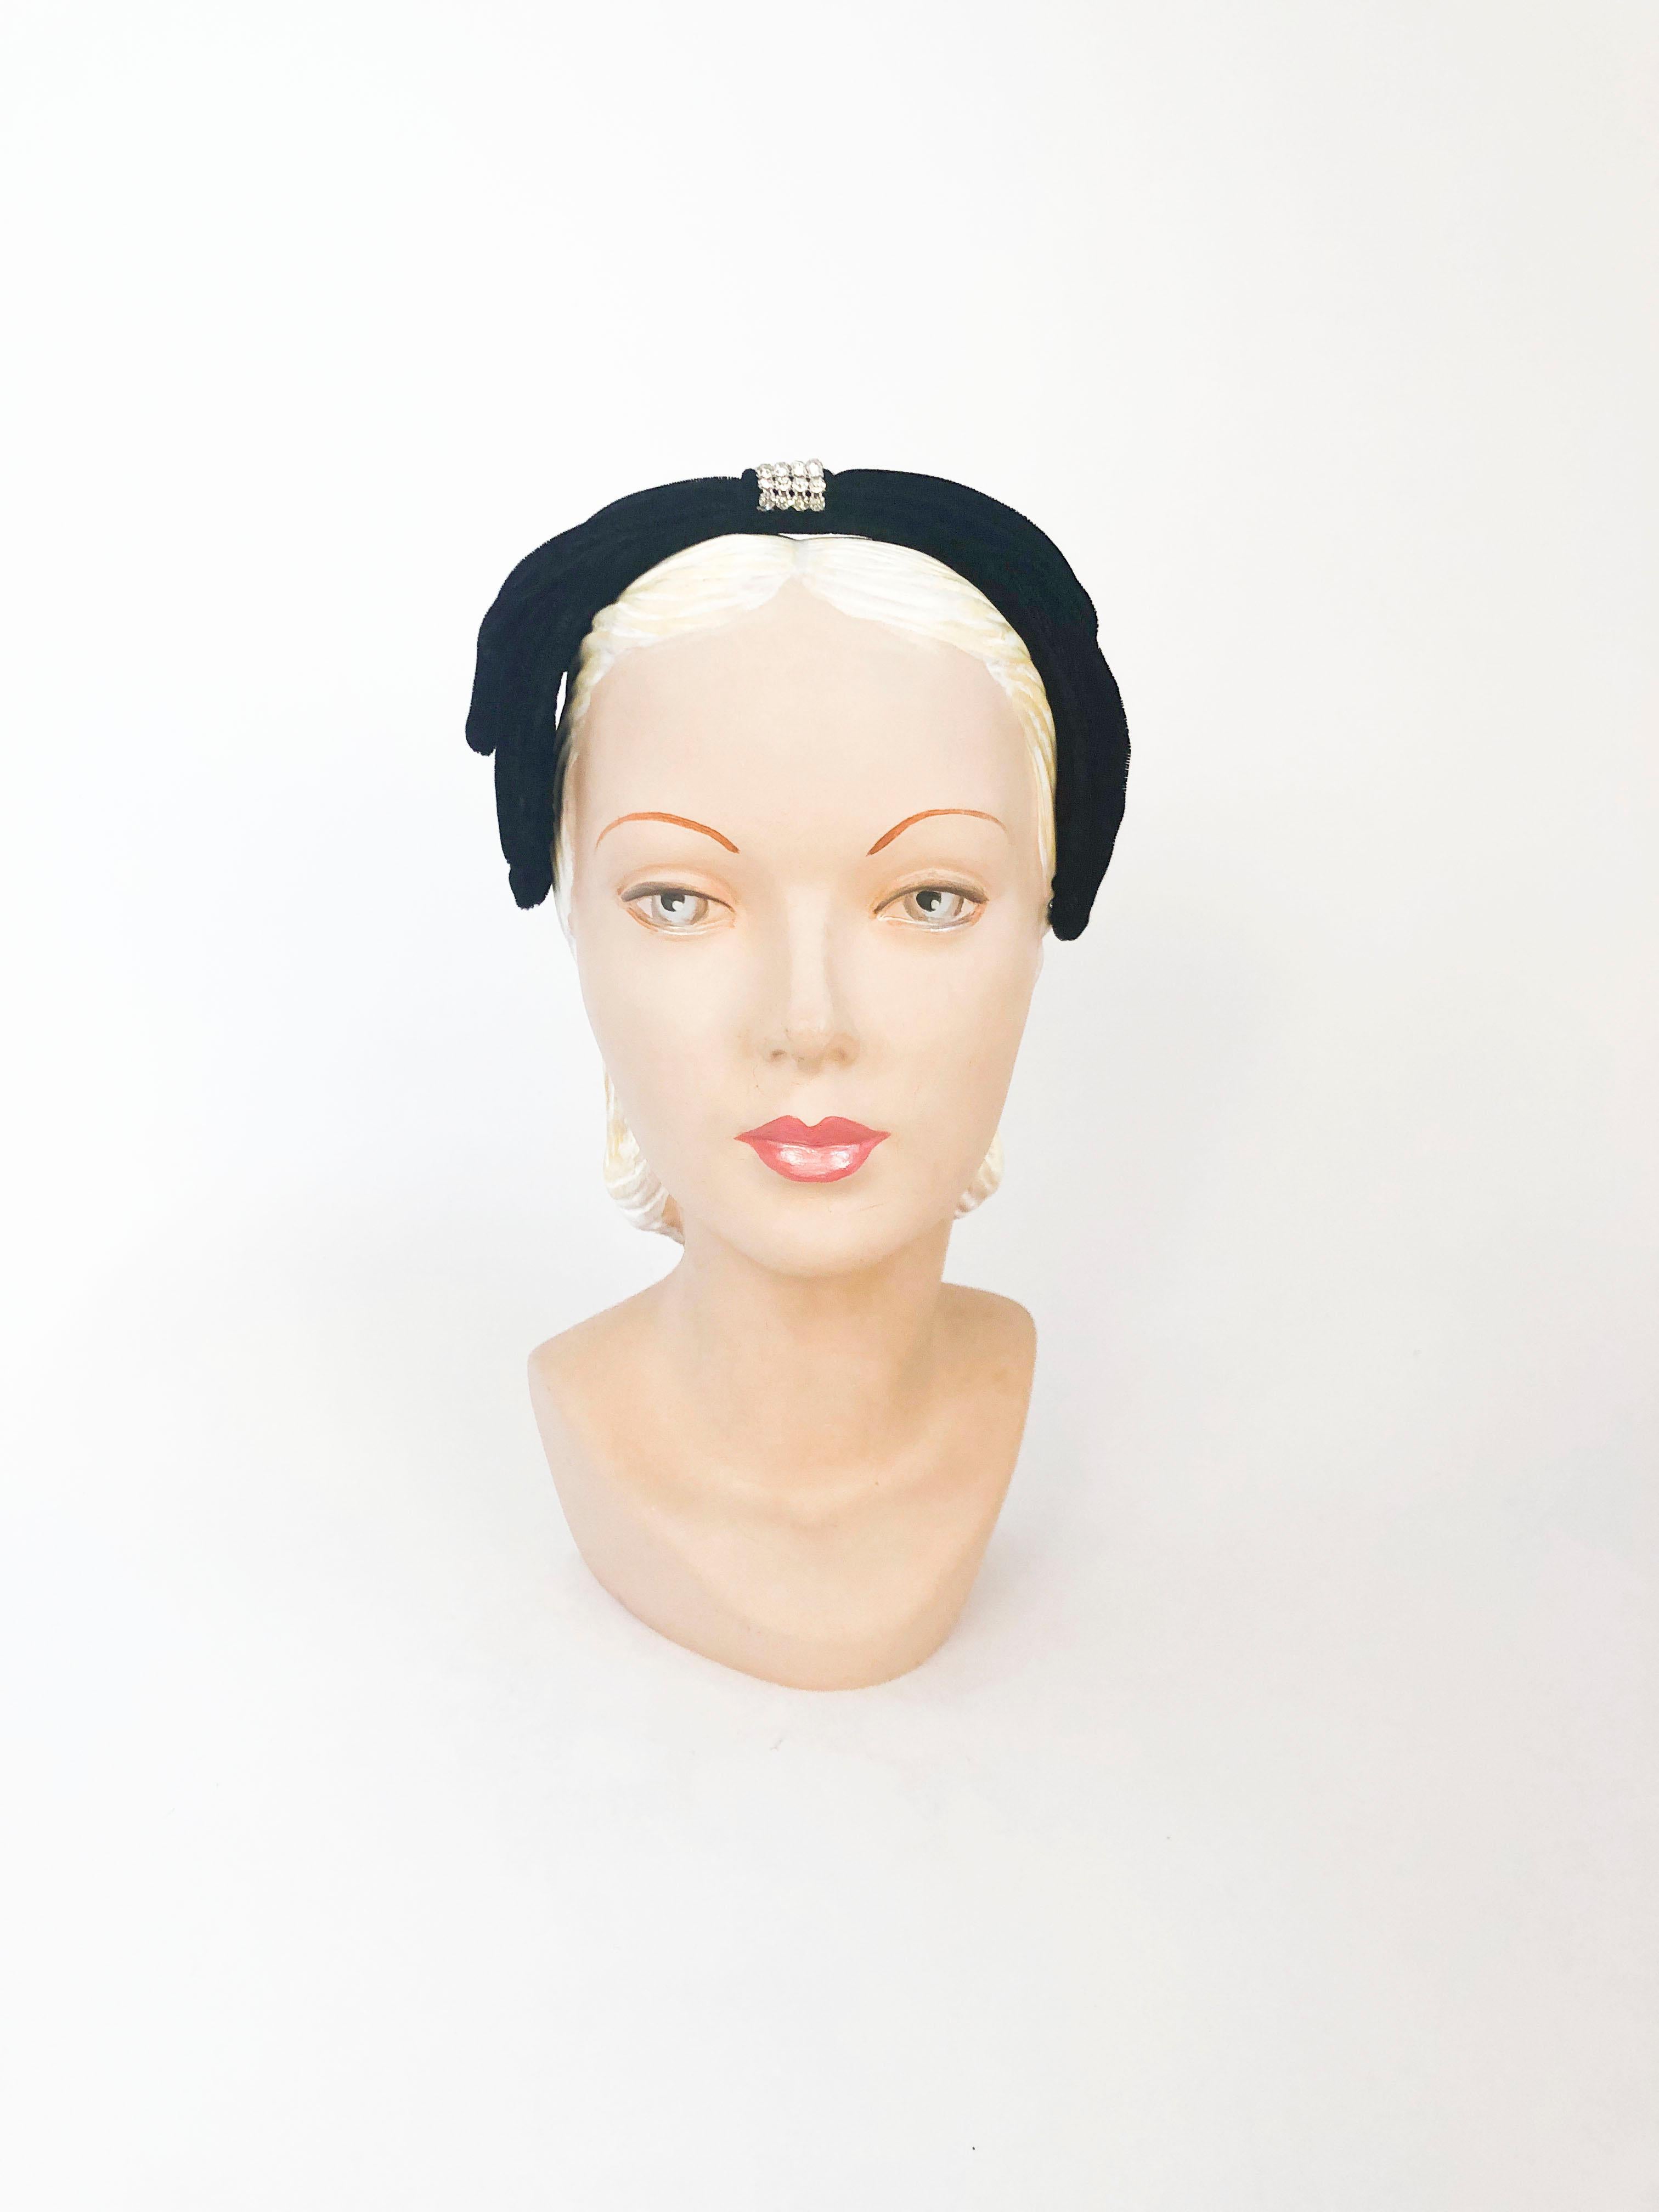 1950's handmade Black cocktail hat made of velvet and decorated with set rhinestone accents on each side and topped with a strip of rhinestone accents to complement the hats bow-like structure.  